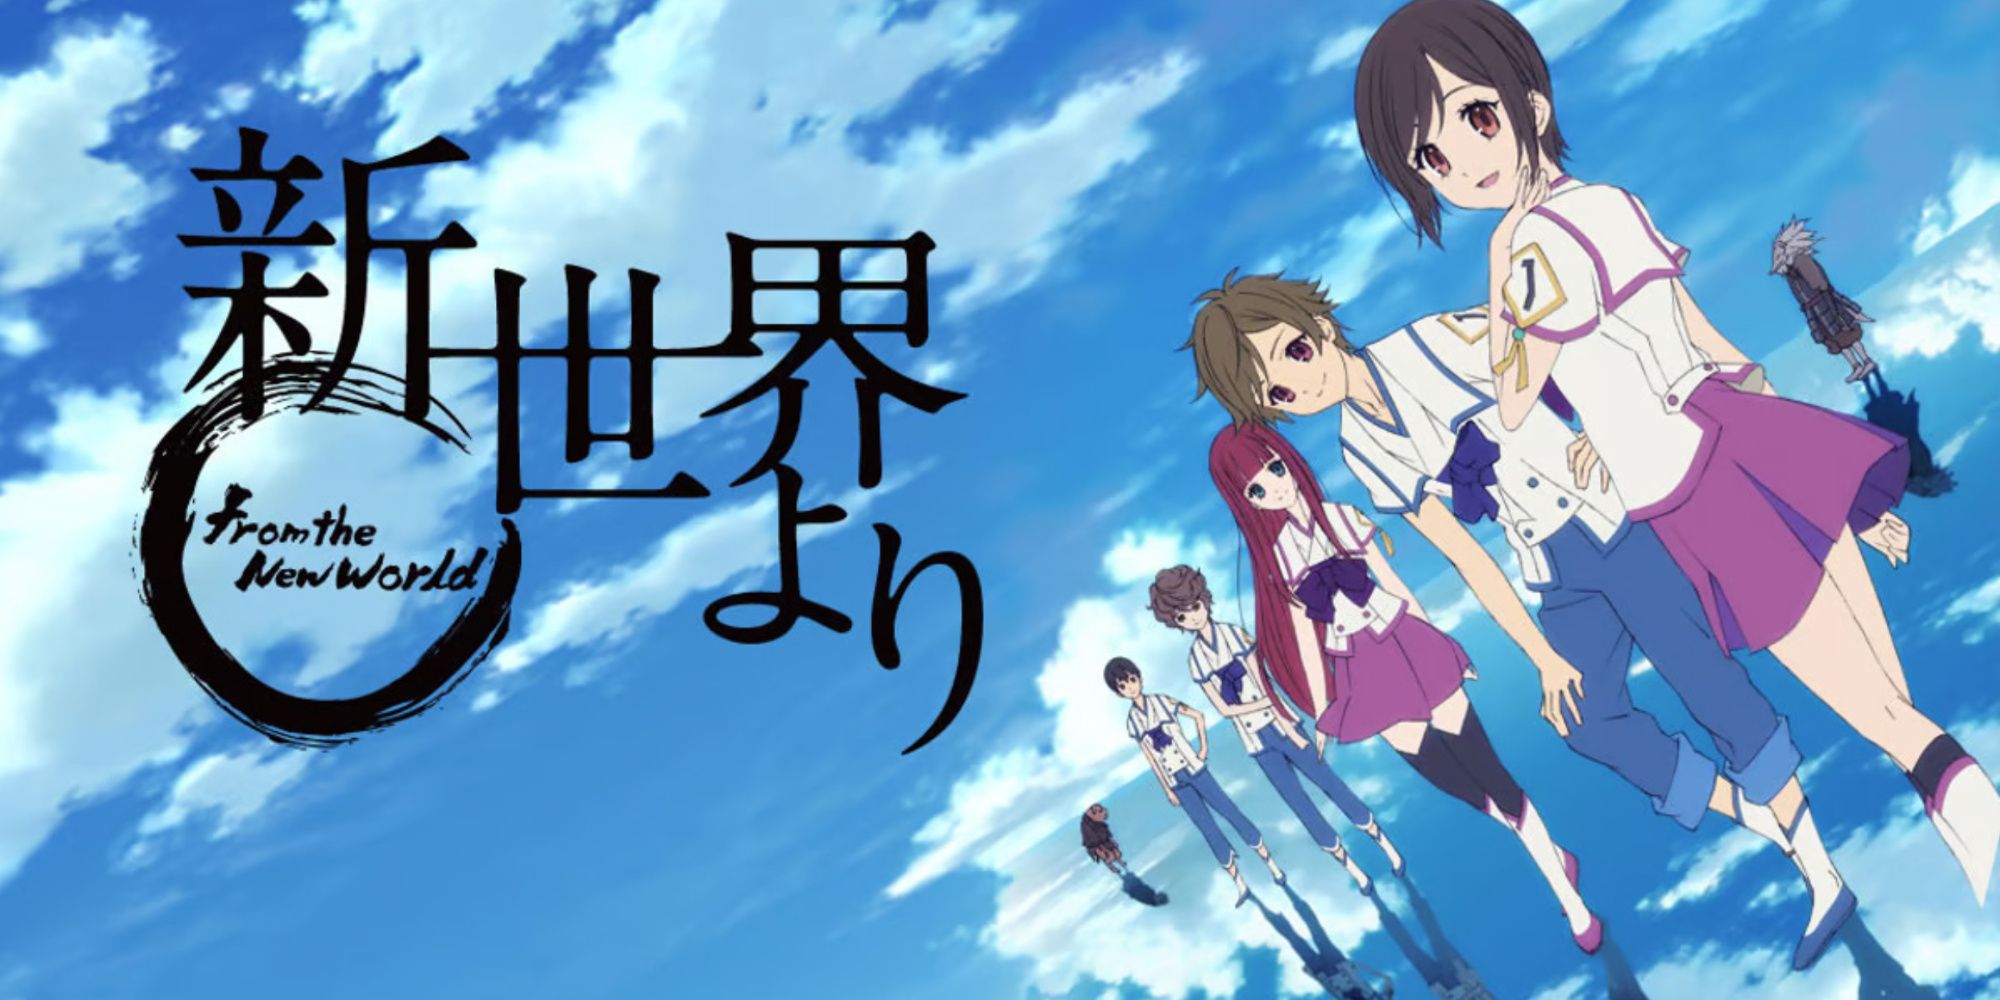 Shinsekai Yori, From the New World, title image featuring the main cast